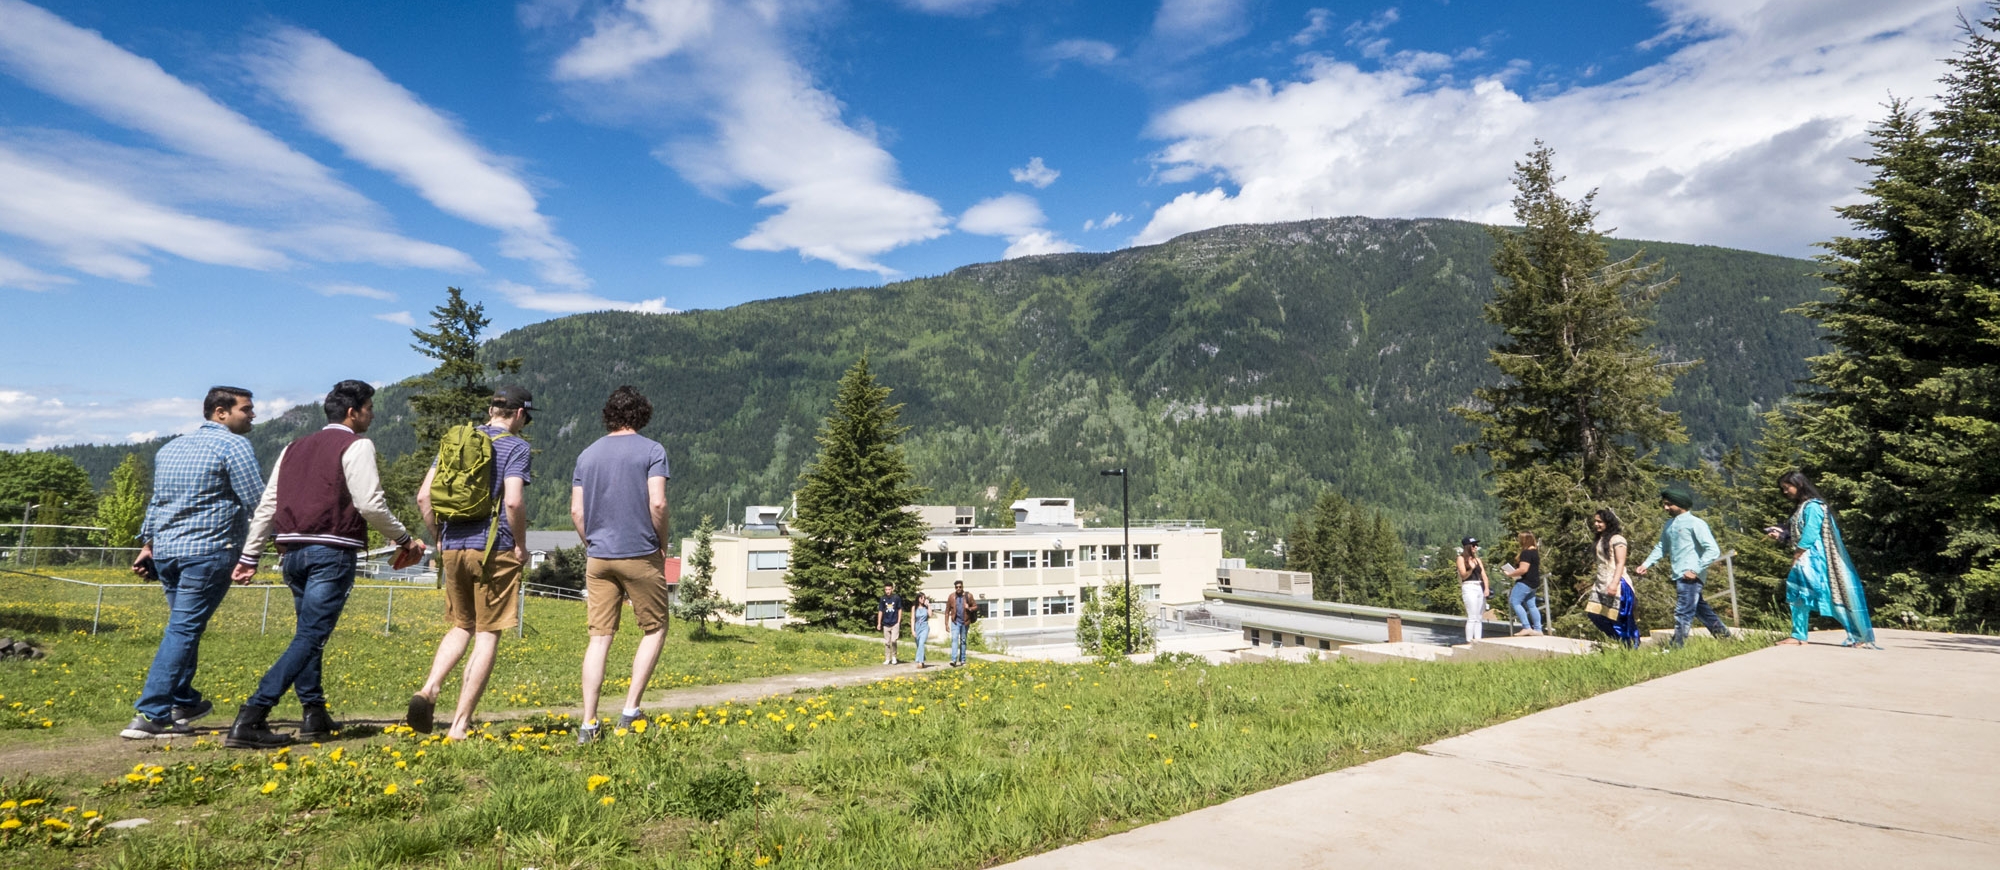 Students walking on the grass at the Selkirk College Tenth Street Campus in Nelson, BC.